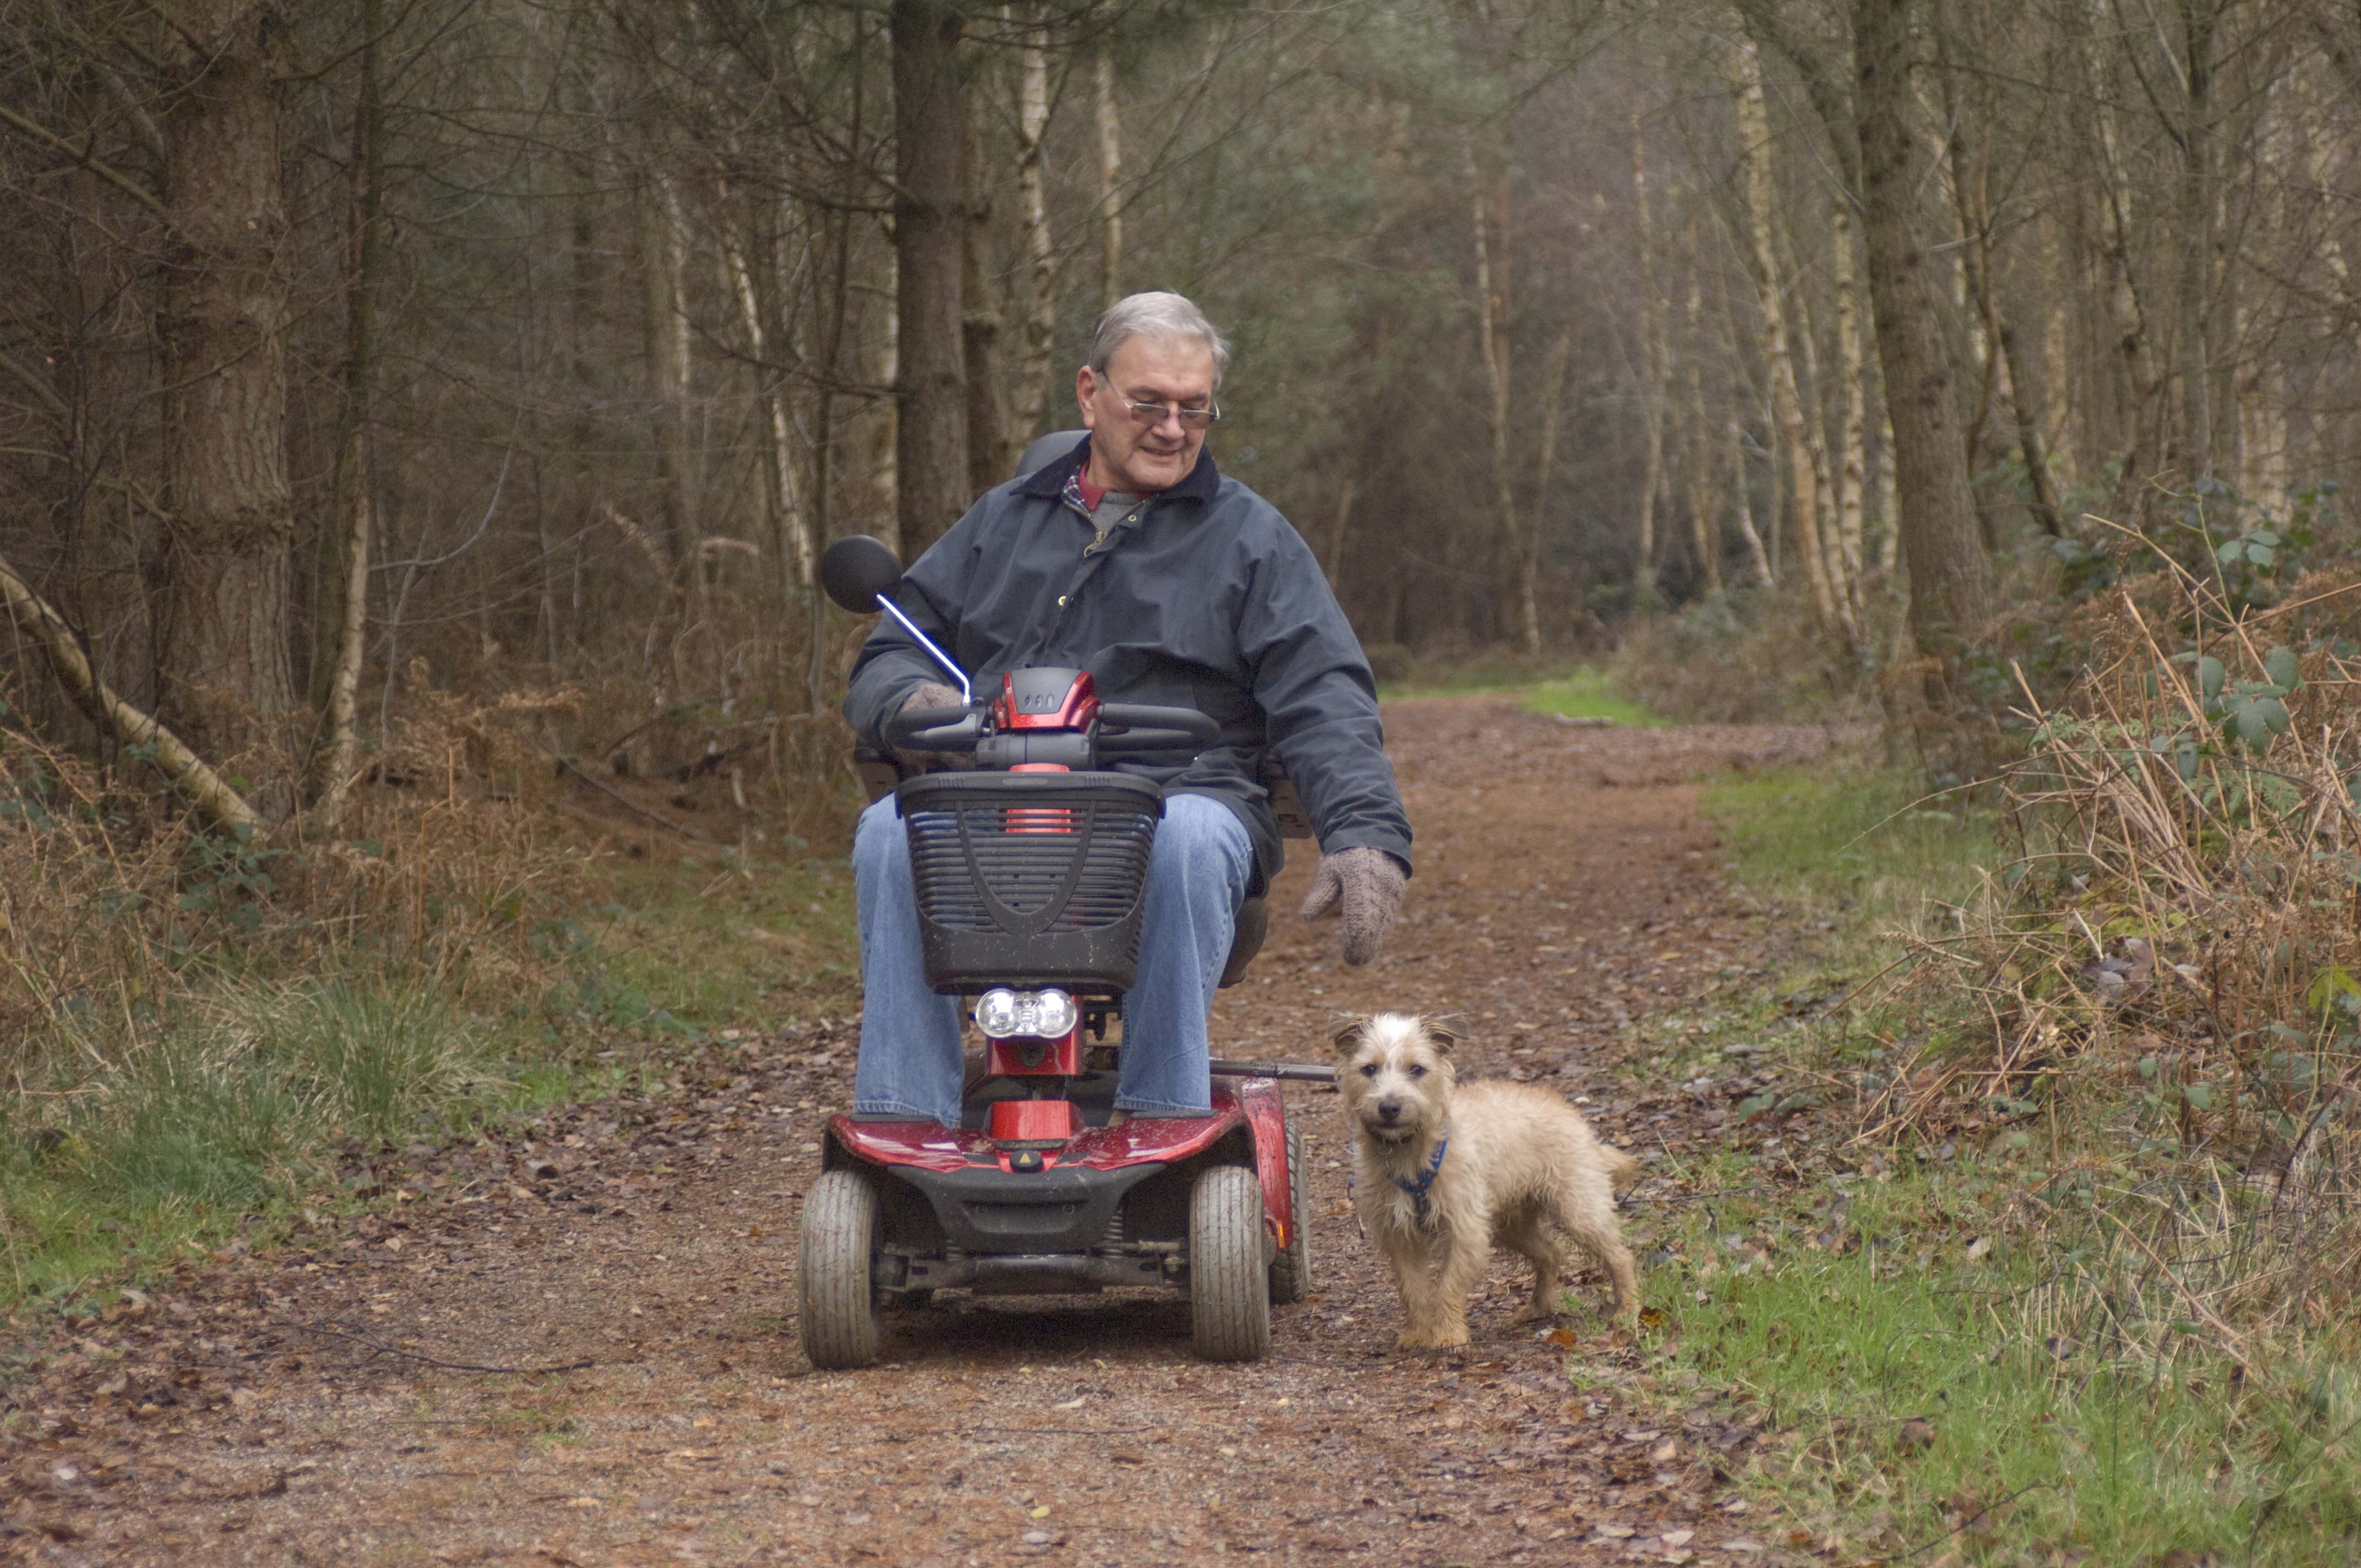 Forest dog walks - man with mobility scooter and dog